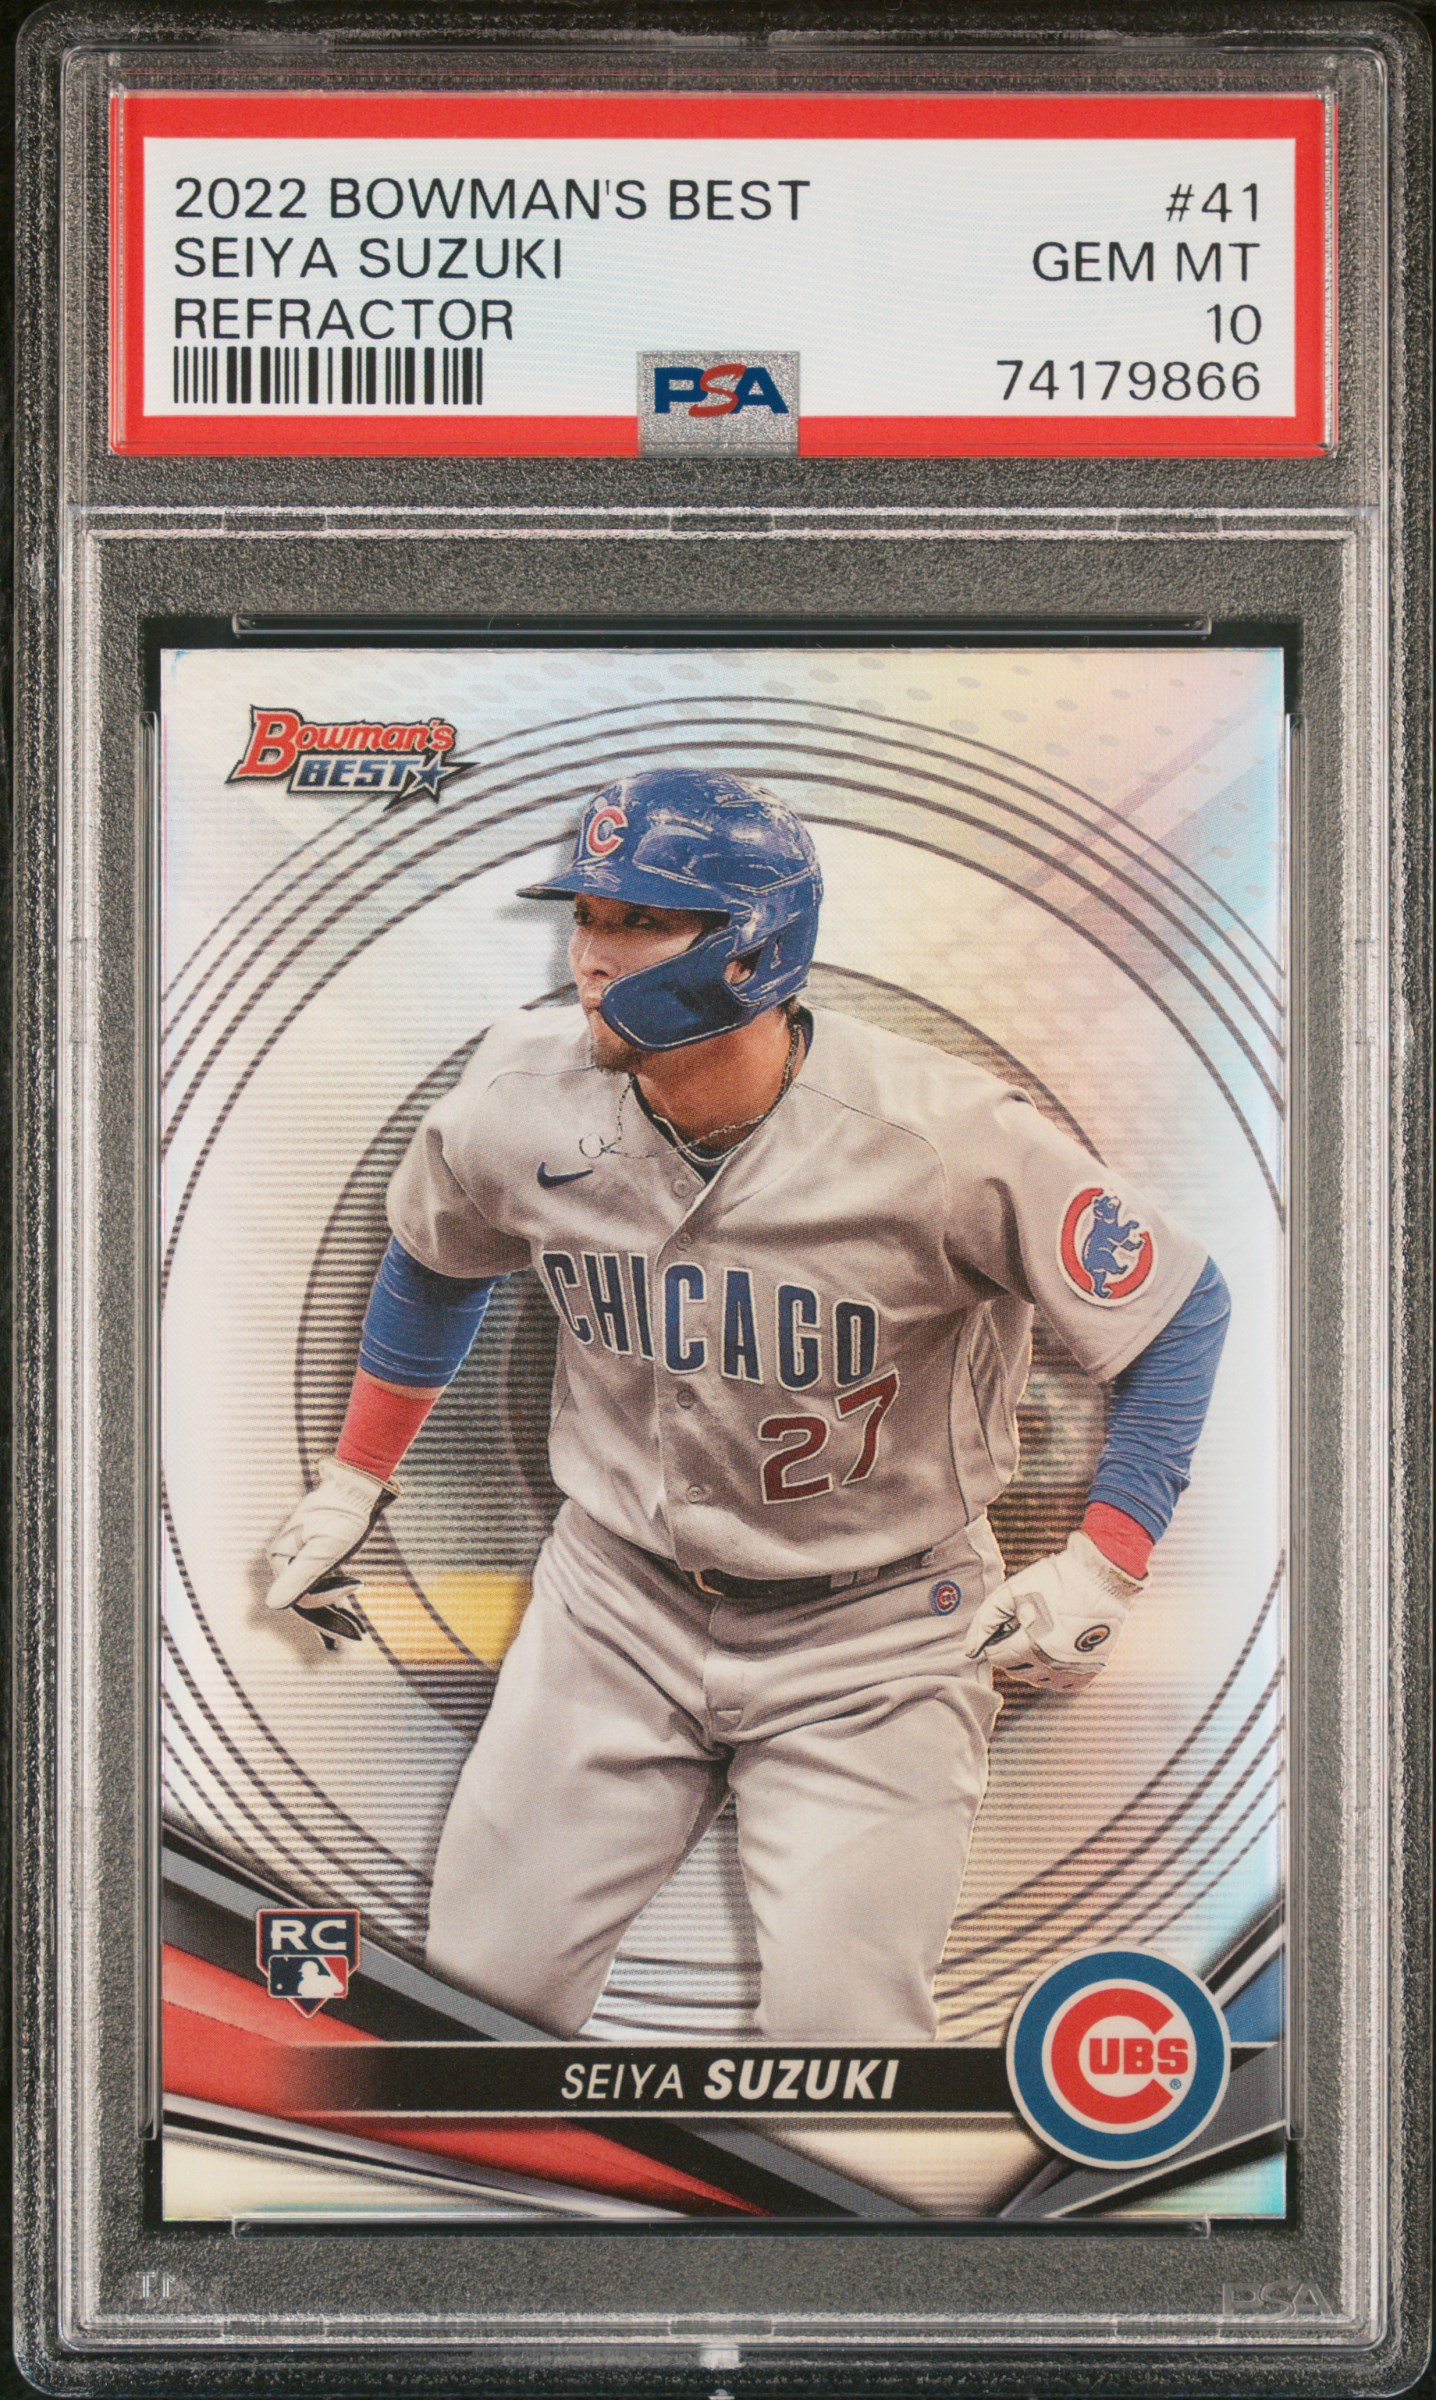 Ultimate Sports Card Refractor Guide